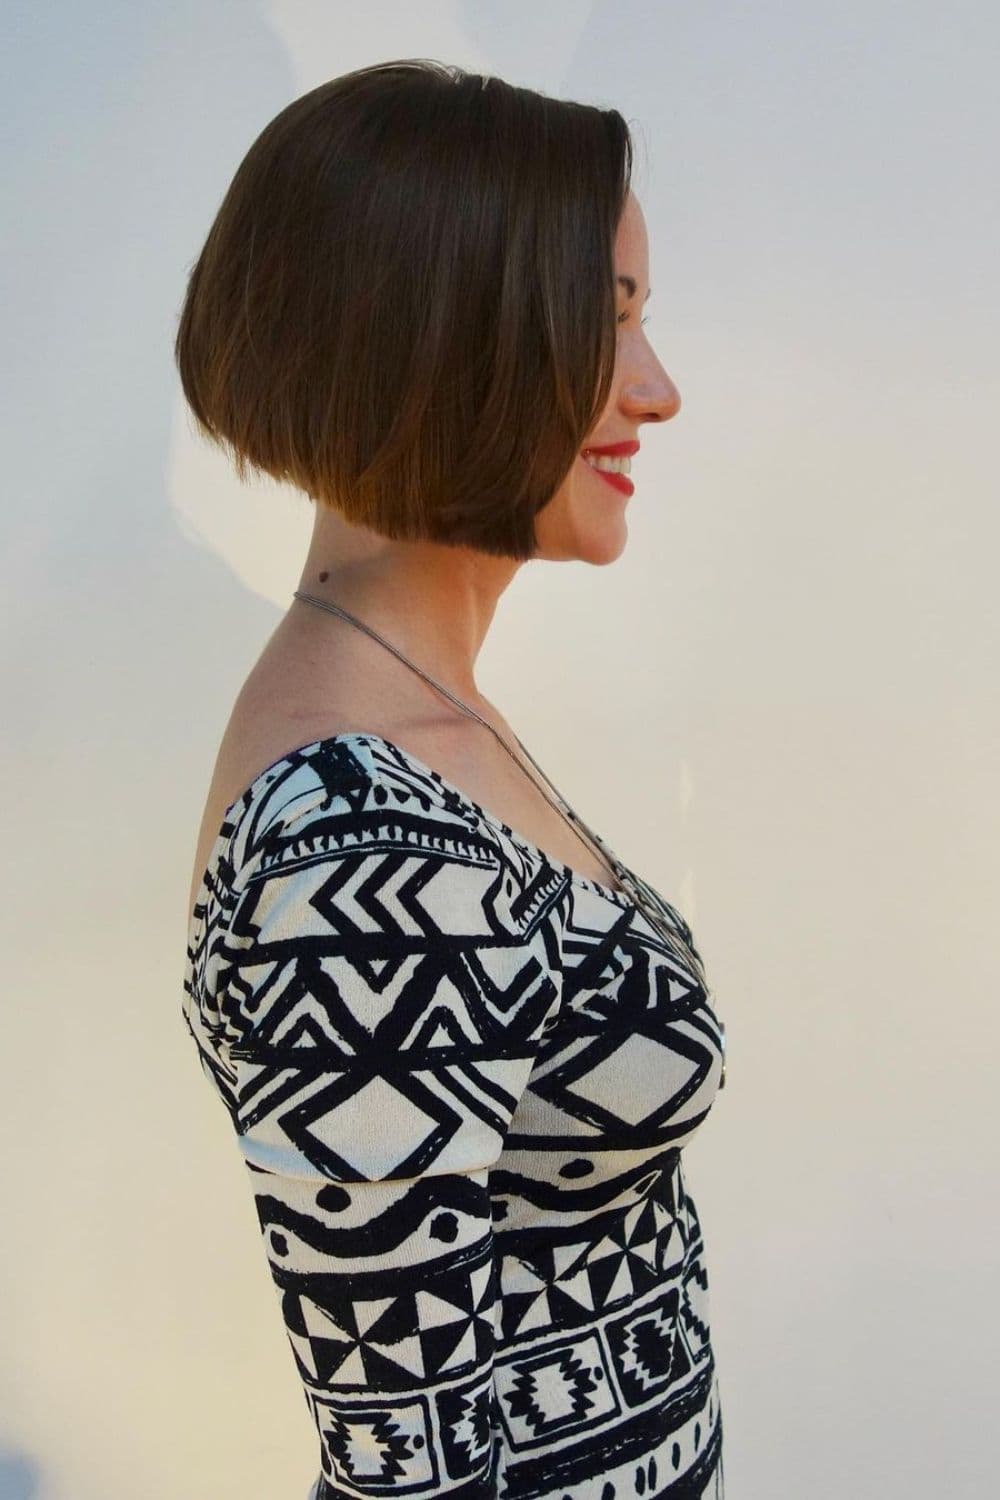 Side view of a woman wearing a black and white patterned blouse with a short A-line cut.